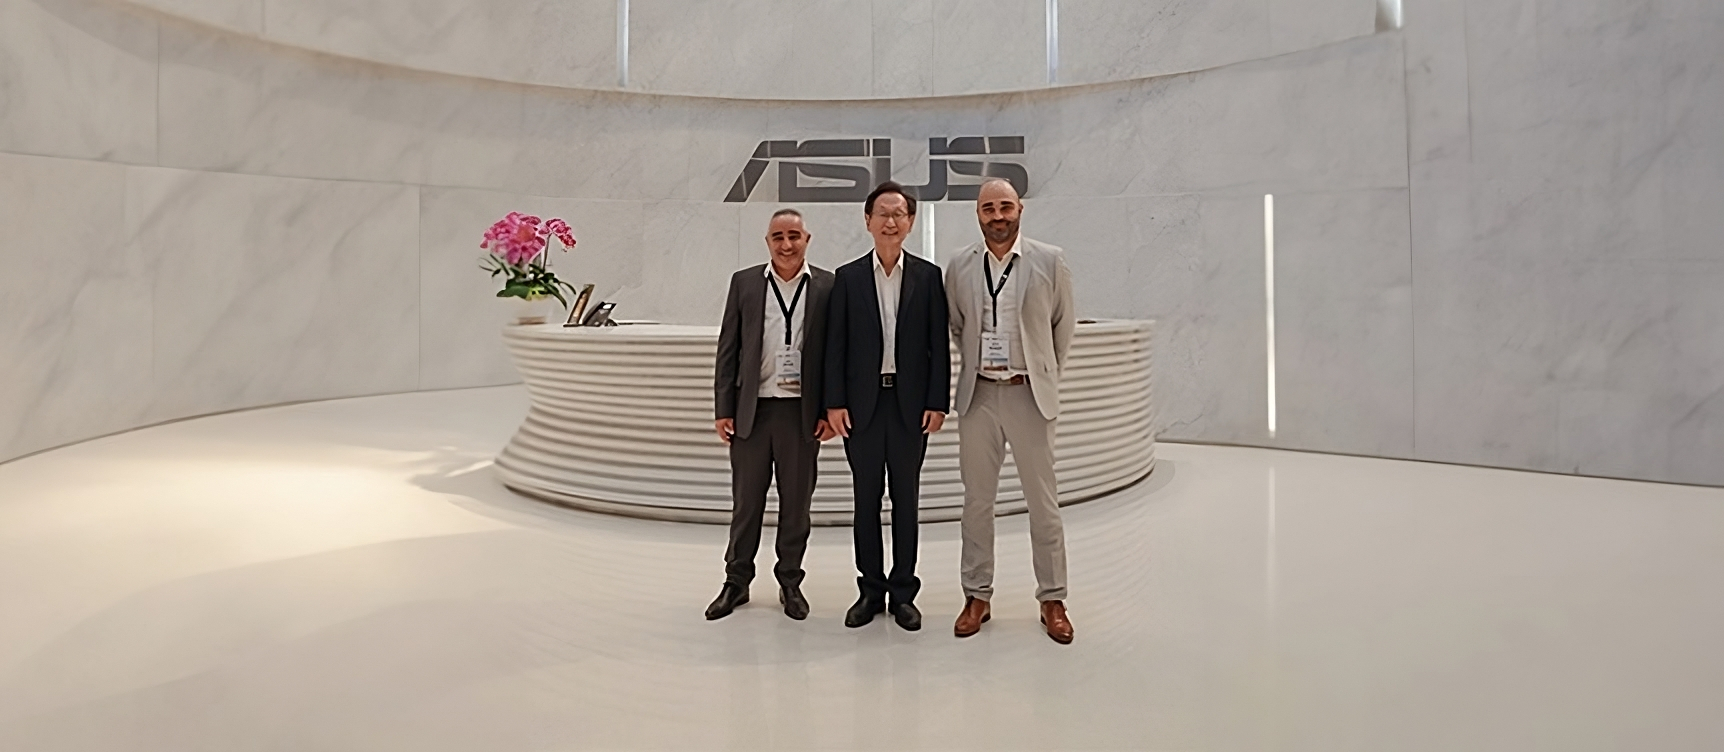 Our general manager has had the great honor and privilege of attending many trade shows and conferences in Taiwan, to personally meet Mr. Jonney Shih, the Chairman of Asus